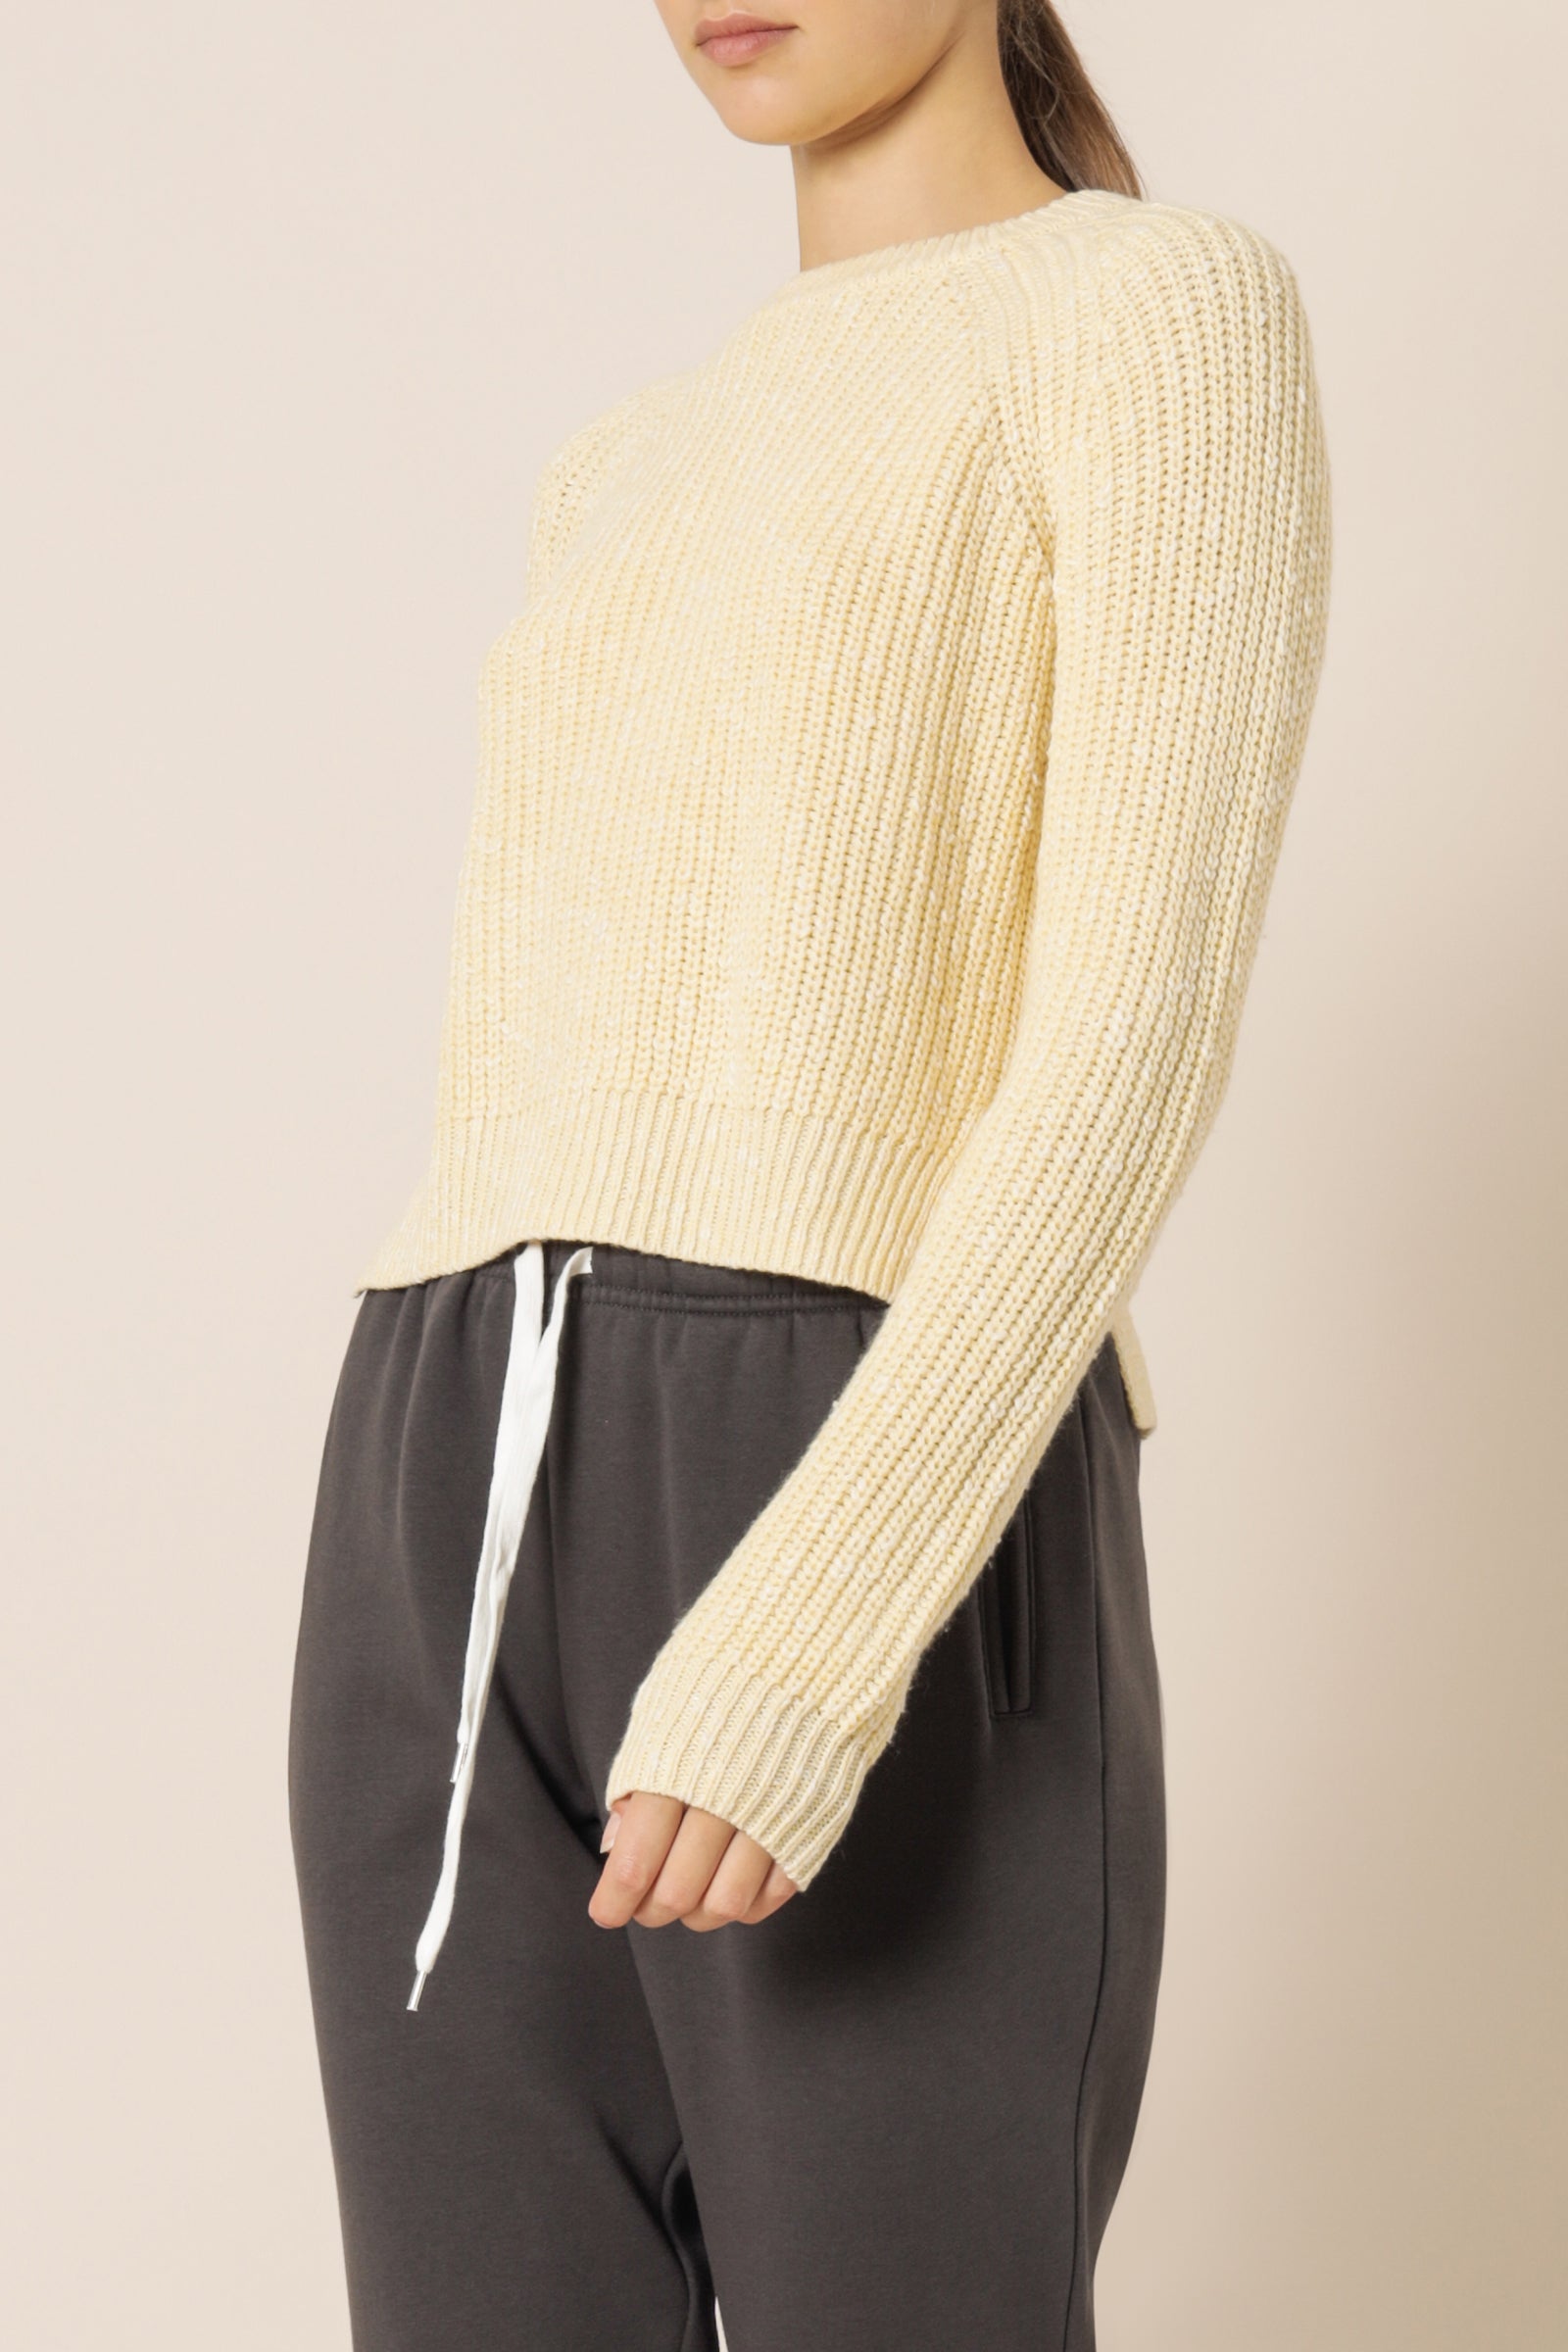 Nude Lucy toby knit jumper banana knits